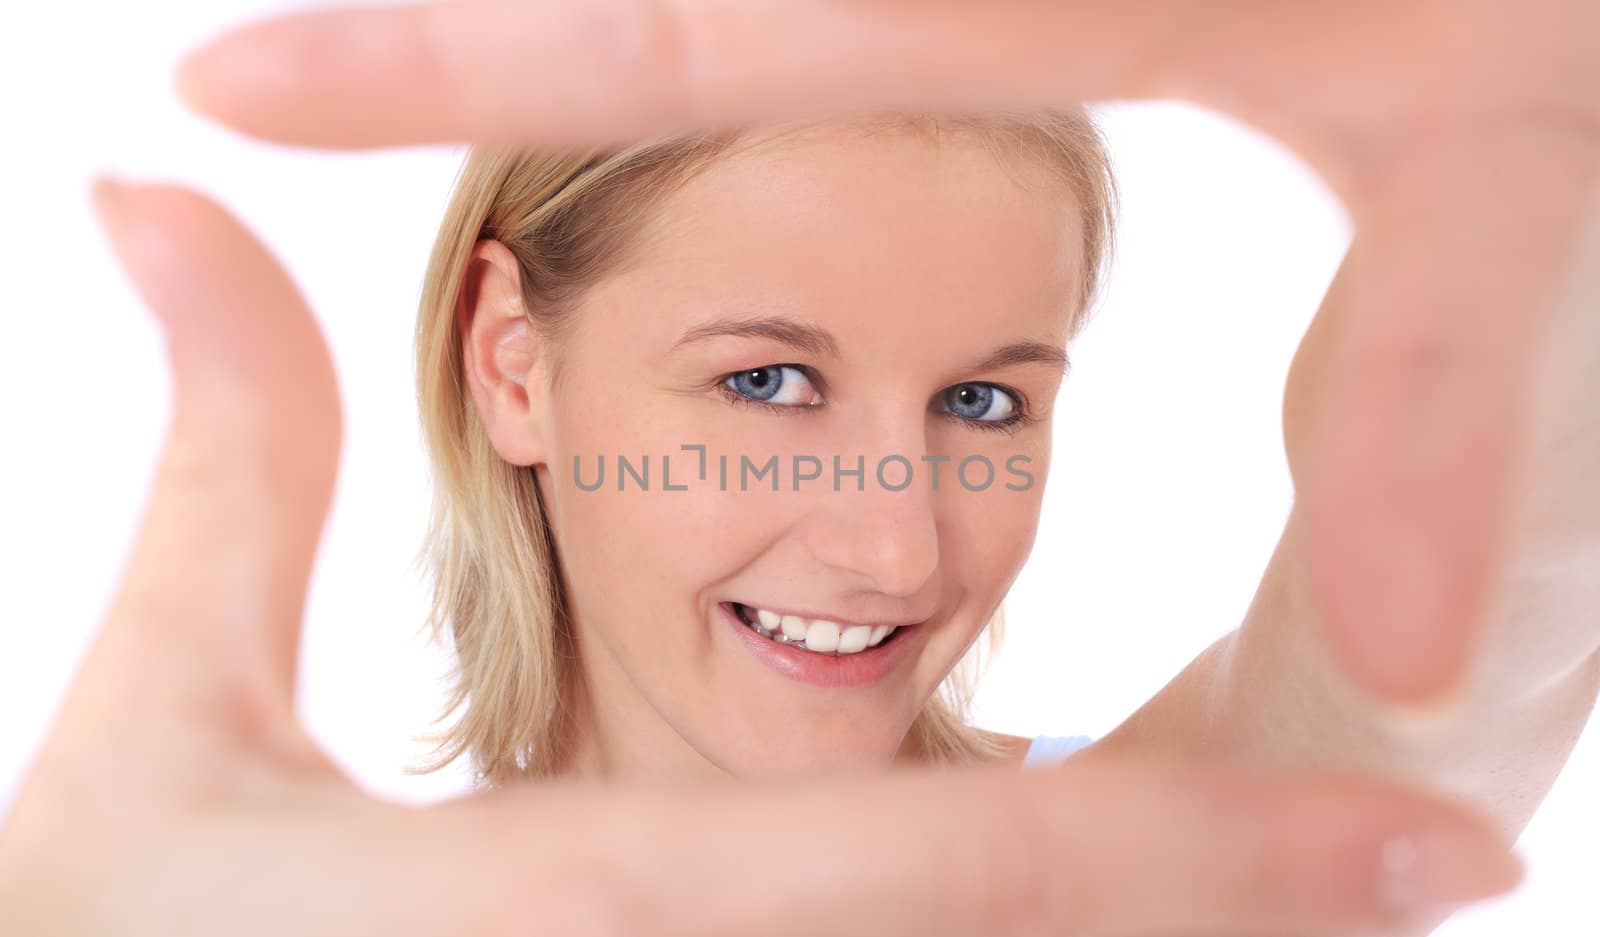 Attractive young scandinavian woman building a frame out of her hands. All on white background.